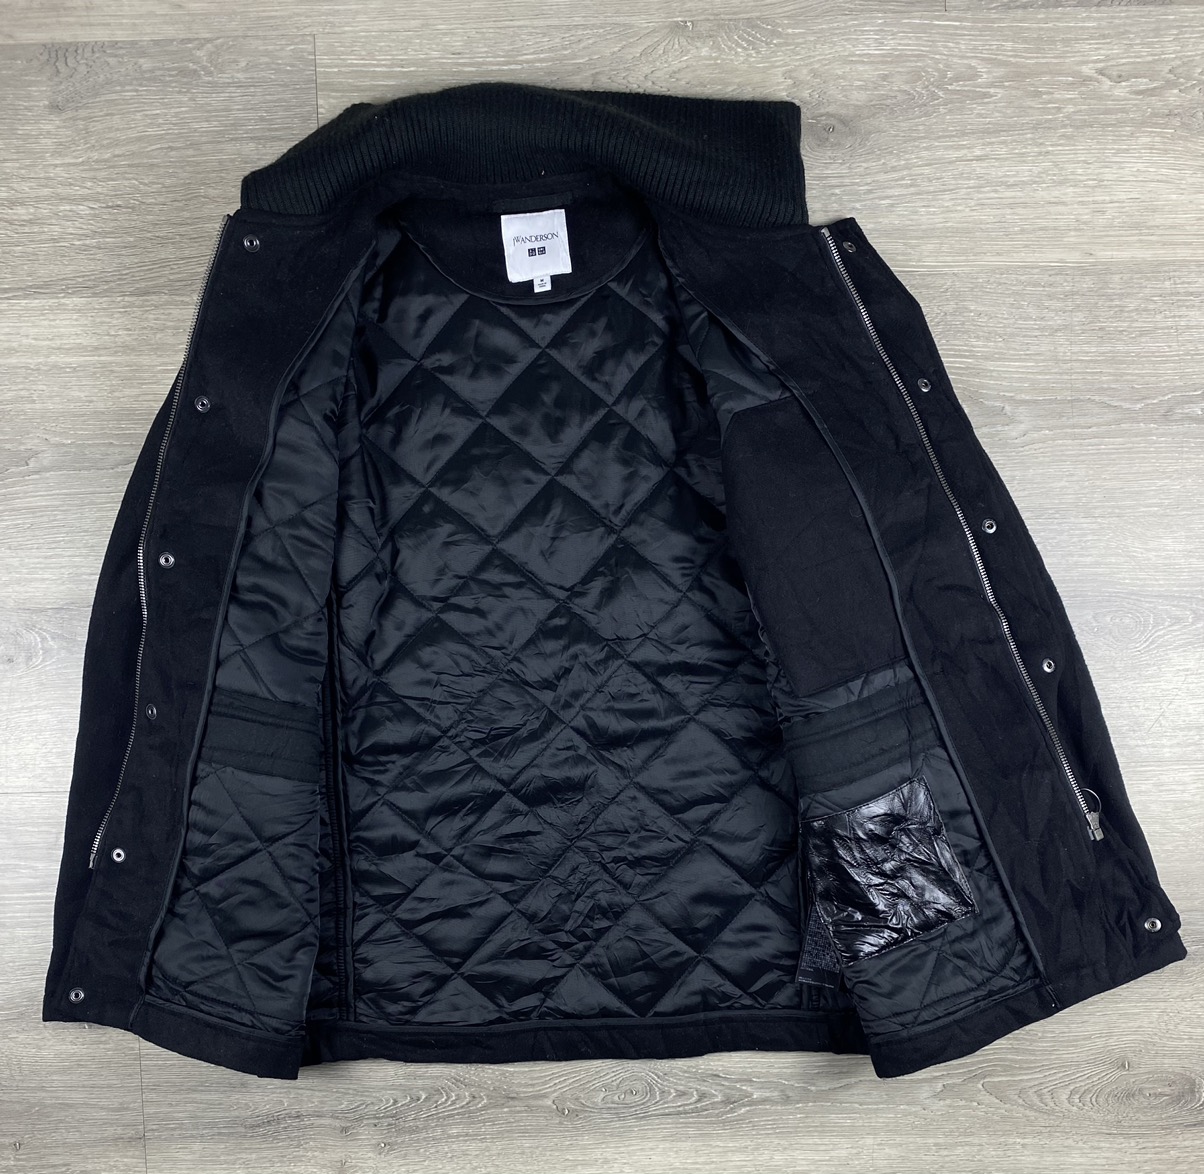 Uniqlo - J. W. Anderson X Uniqlo Quilted Double Pocket Wool Jacket - 3